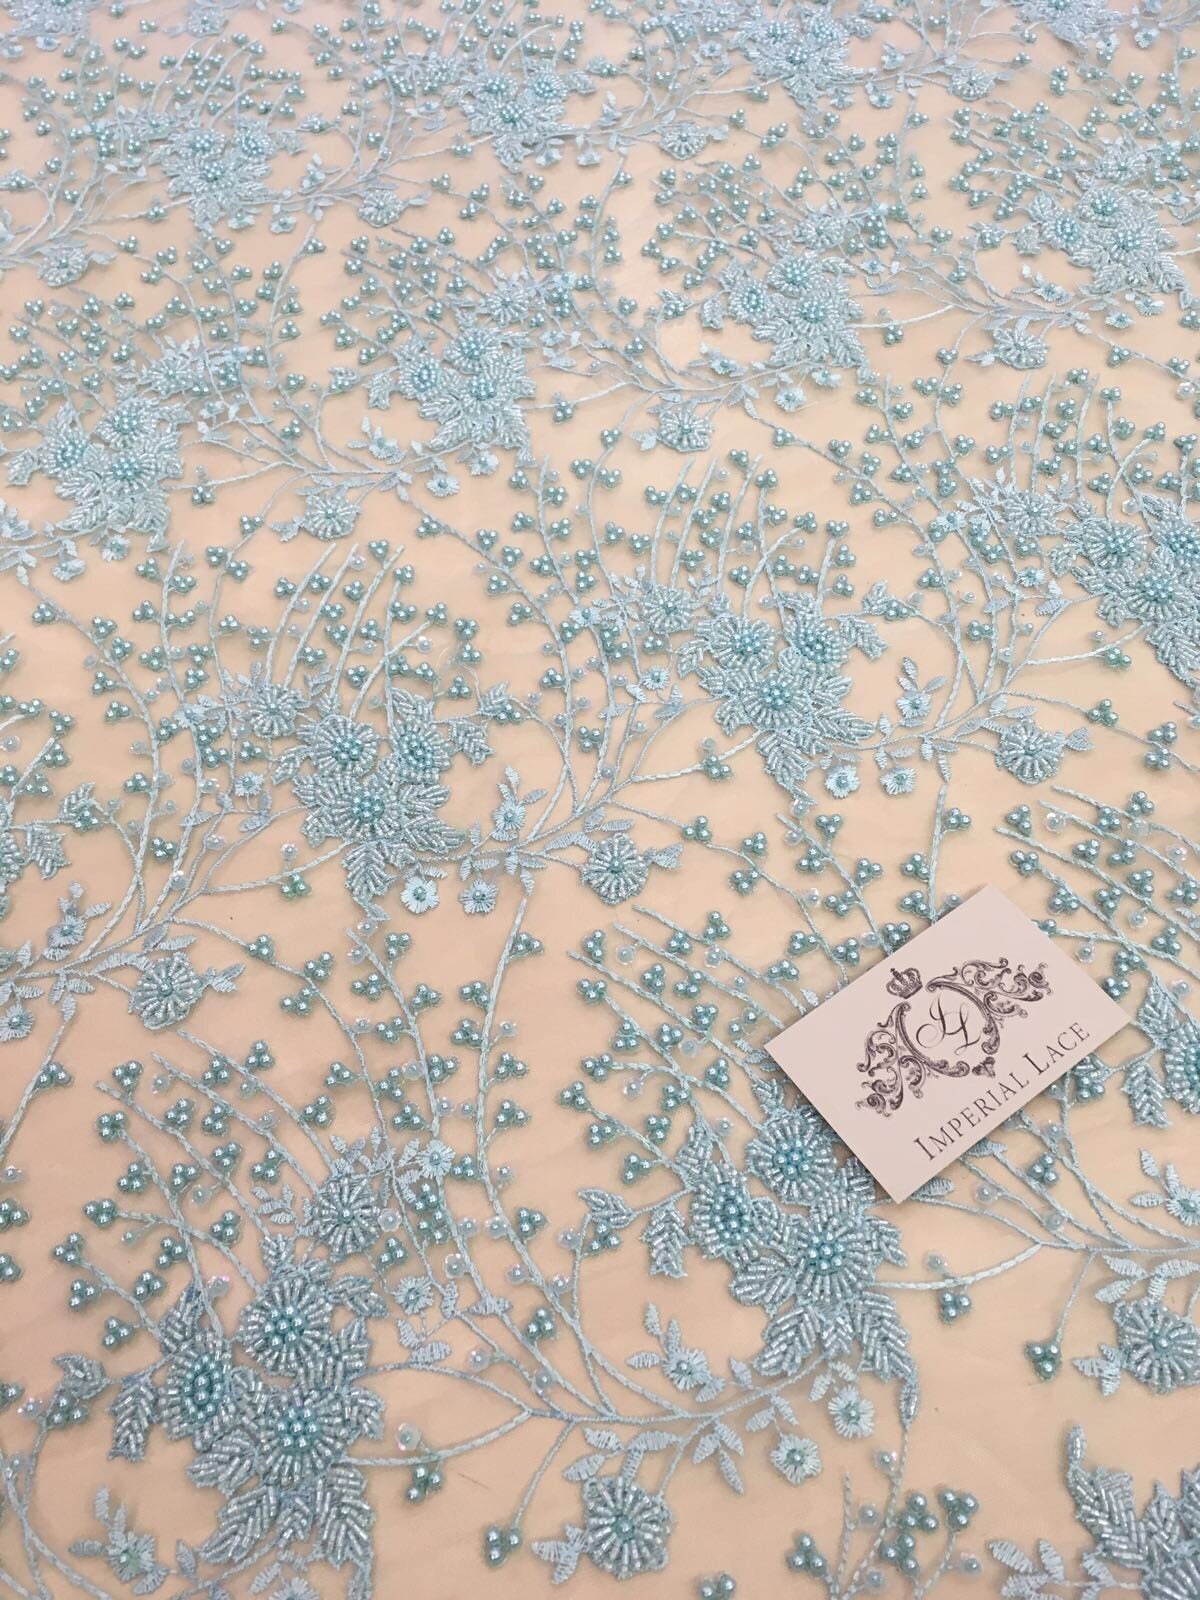 3D Blue lace fabric Beaded Lace Fabric Blue lace fabric Hand | Etsy